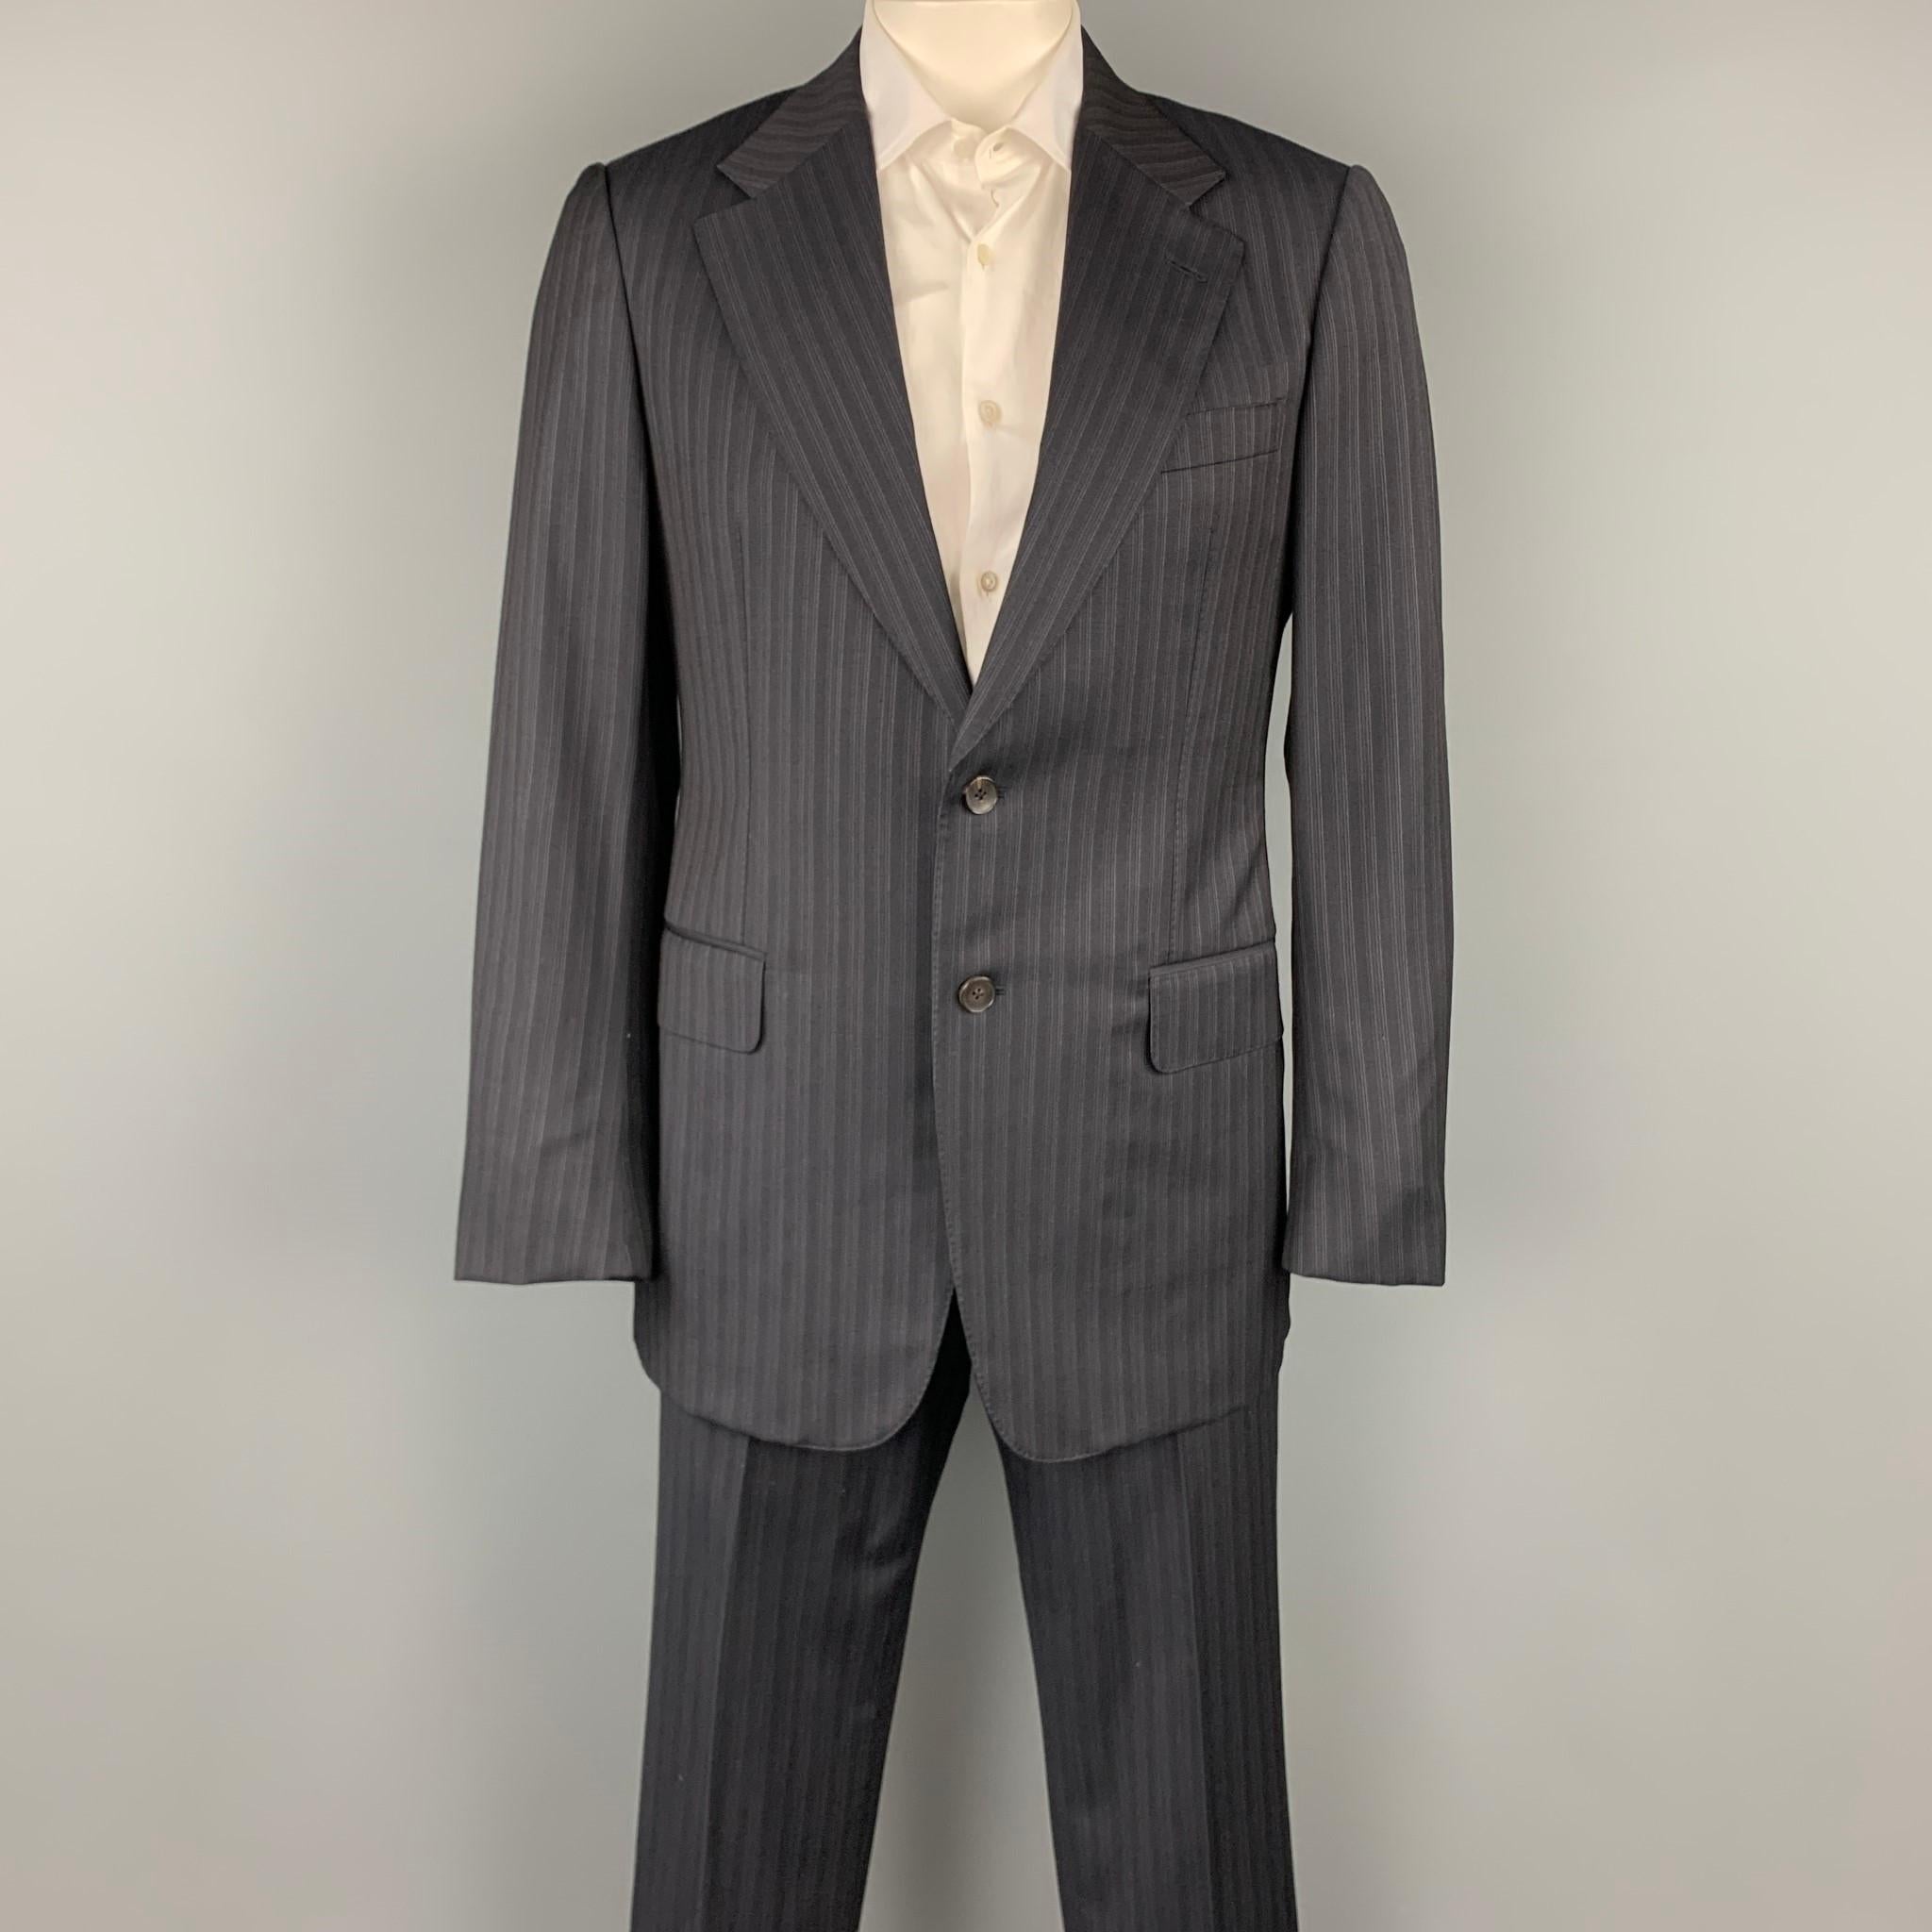 GUCCI suit comes in a black stripe wool with a full liner and includes a single breasted, two button sport coat with a notch lapel and matching flat front trousers. Made in Italy.

Very Good Pre-Owned Condition.
Marked: IT 52